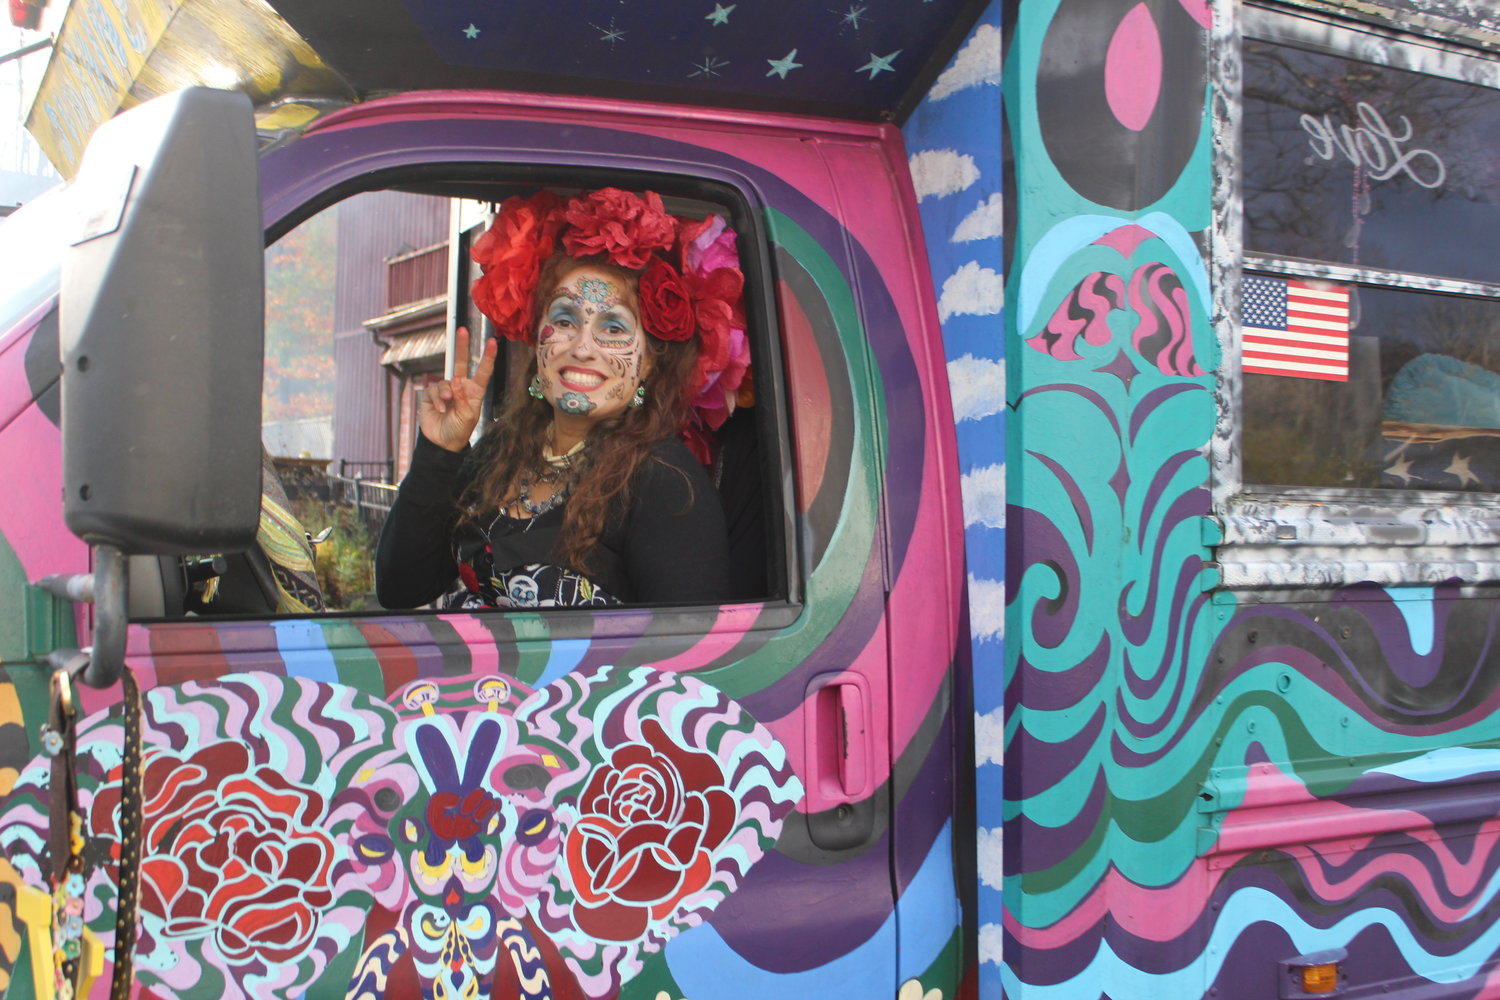 Debbie Fisher Palmarini participated in the parade behind the wheel of her Sunshine Bus.